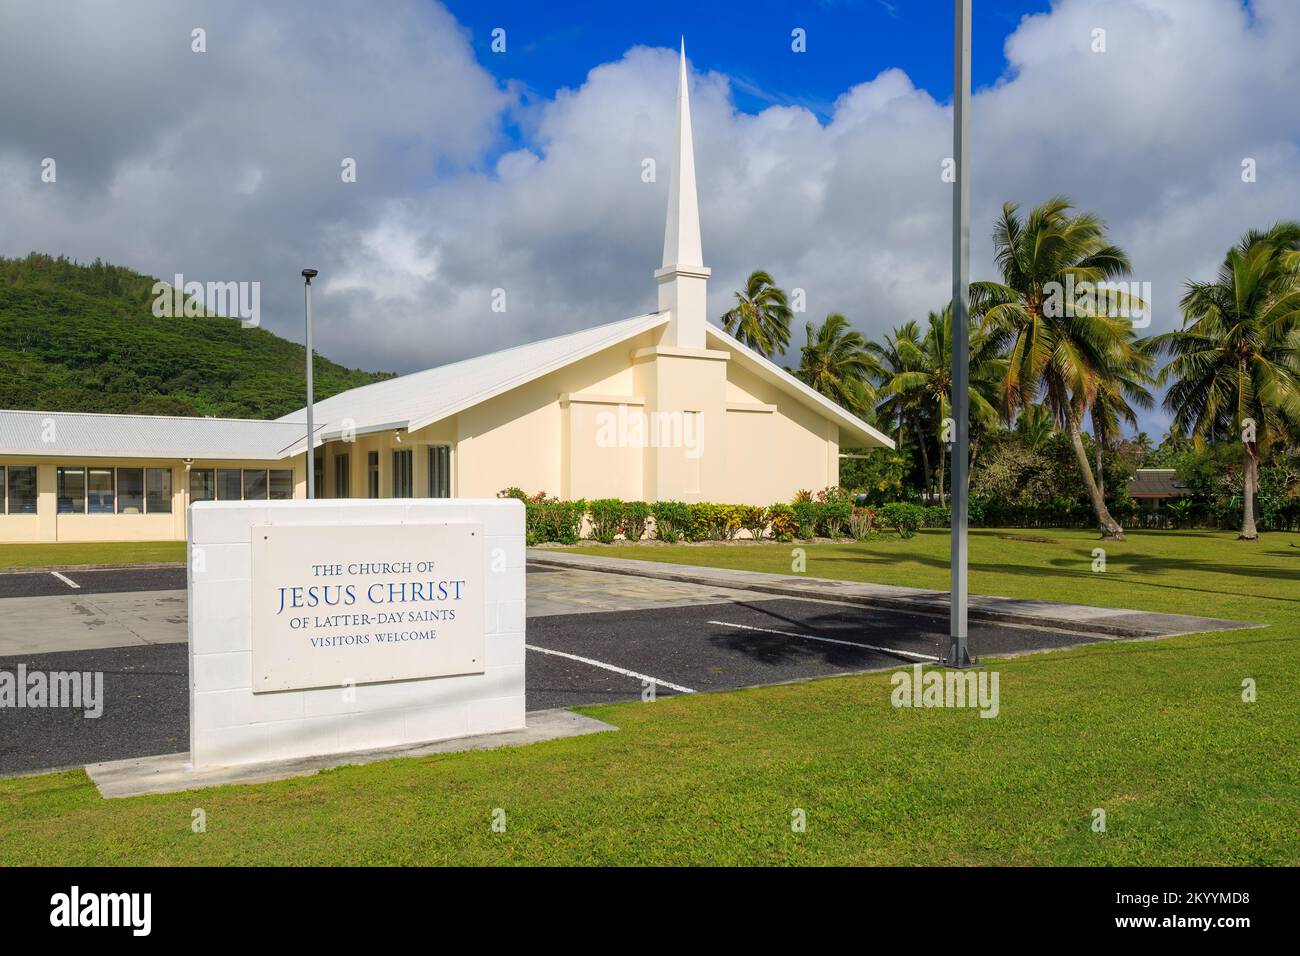 The Church of Latter Day Saints, also known as the Mormon church, on the island of Rarotonga, Cook Islands Stock Photo